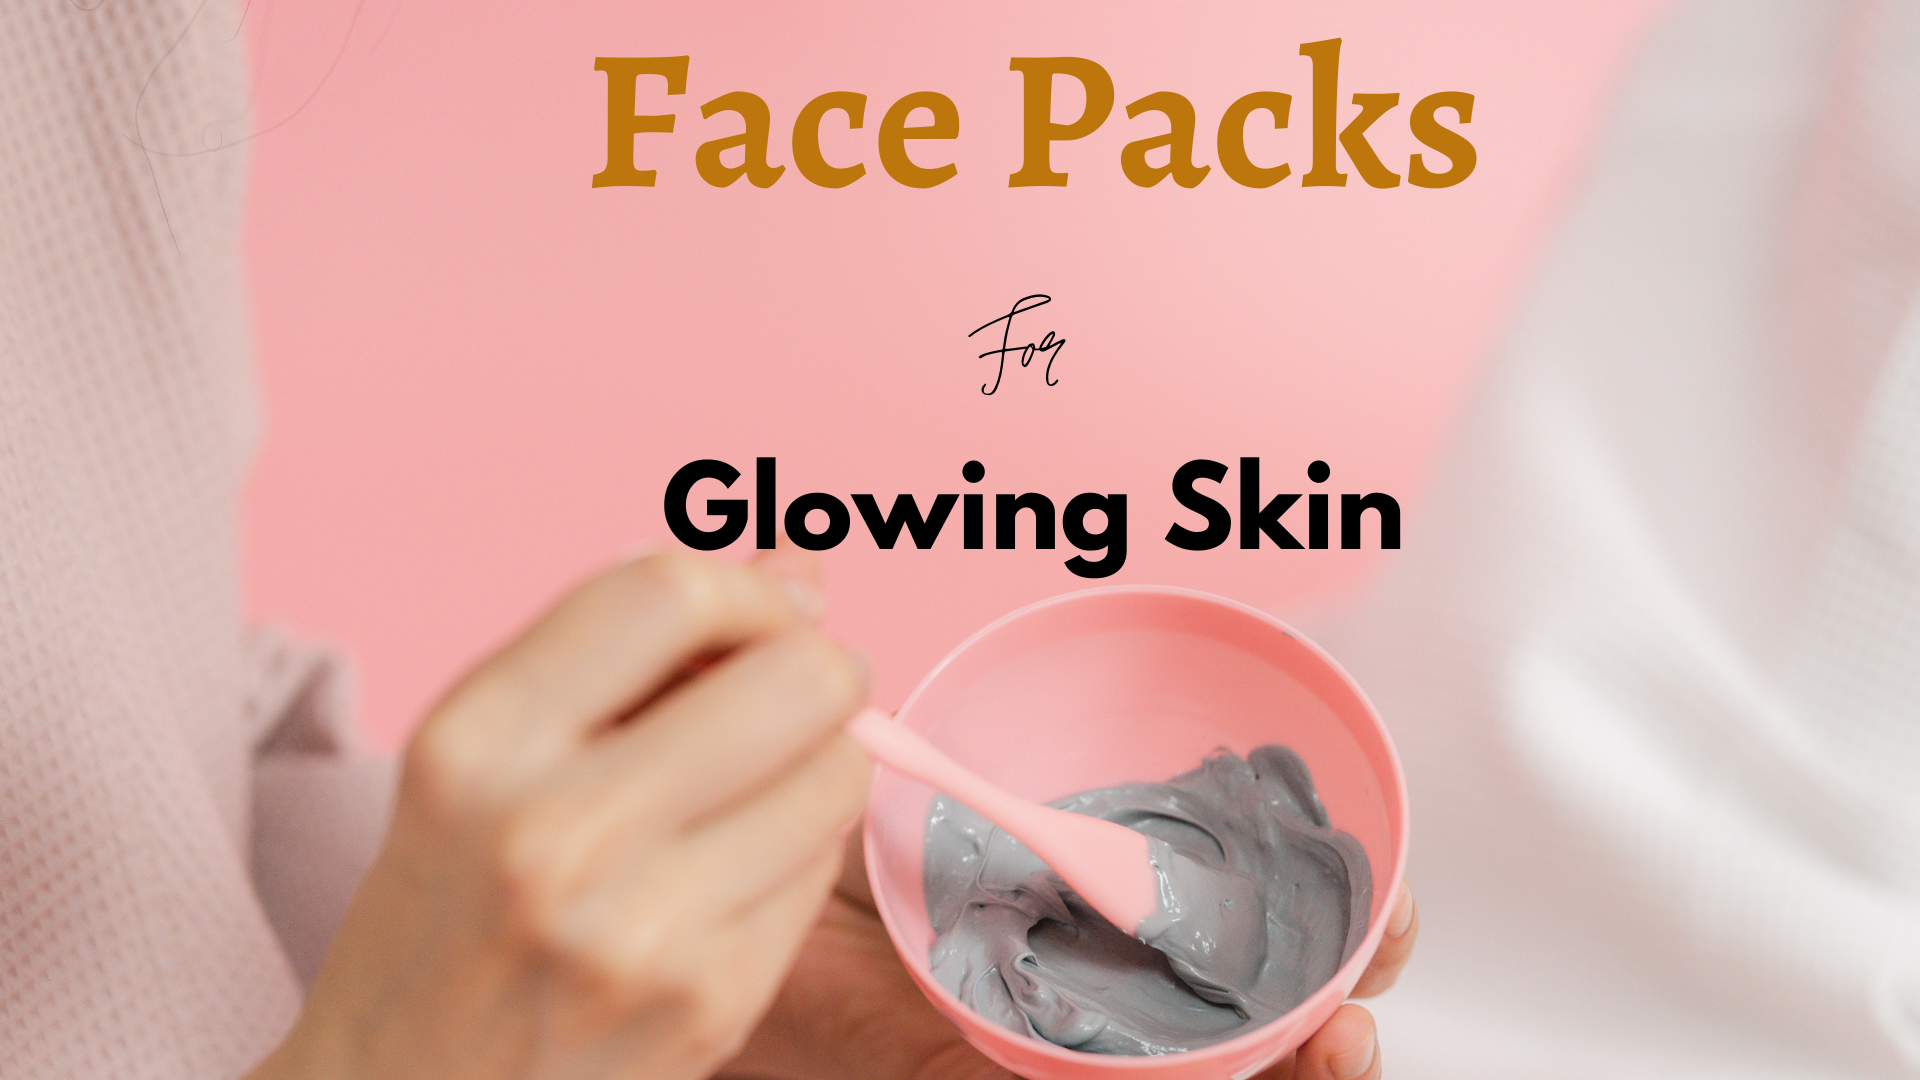 11 Best Face Pack For Glowing Skin In India - Enhance Skin Radiance